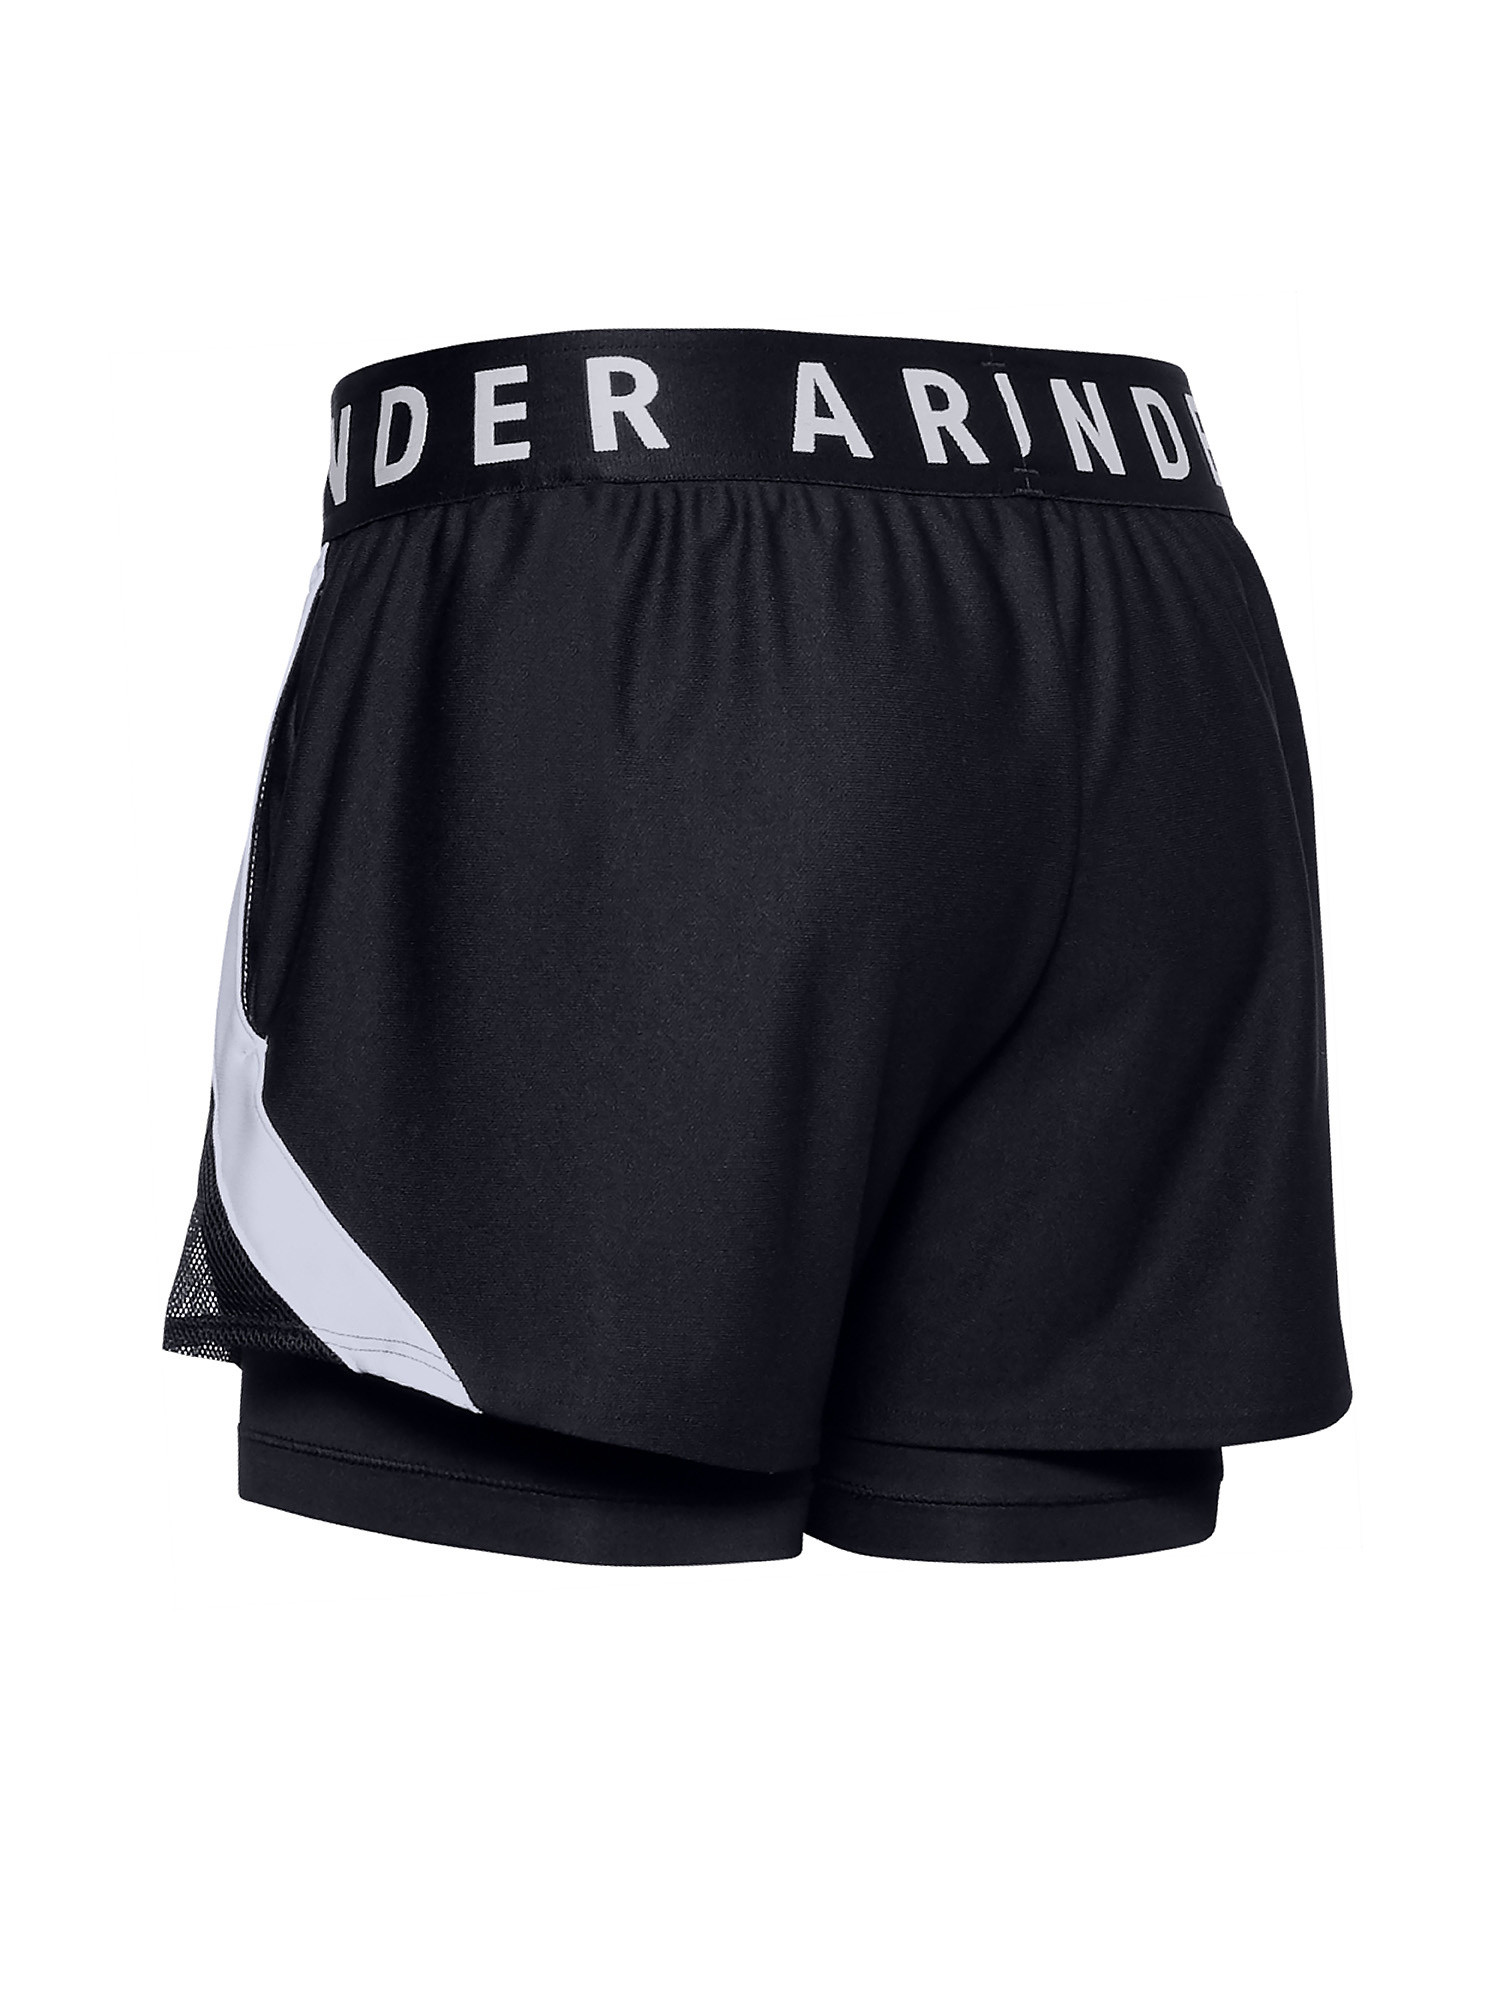 Under Armour - Shorts UA Play Up 2 in 1, Nero, large image number 1